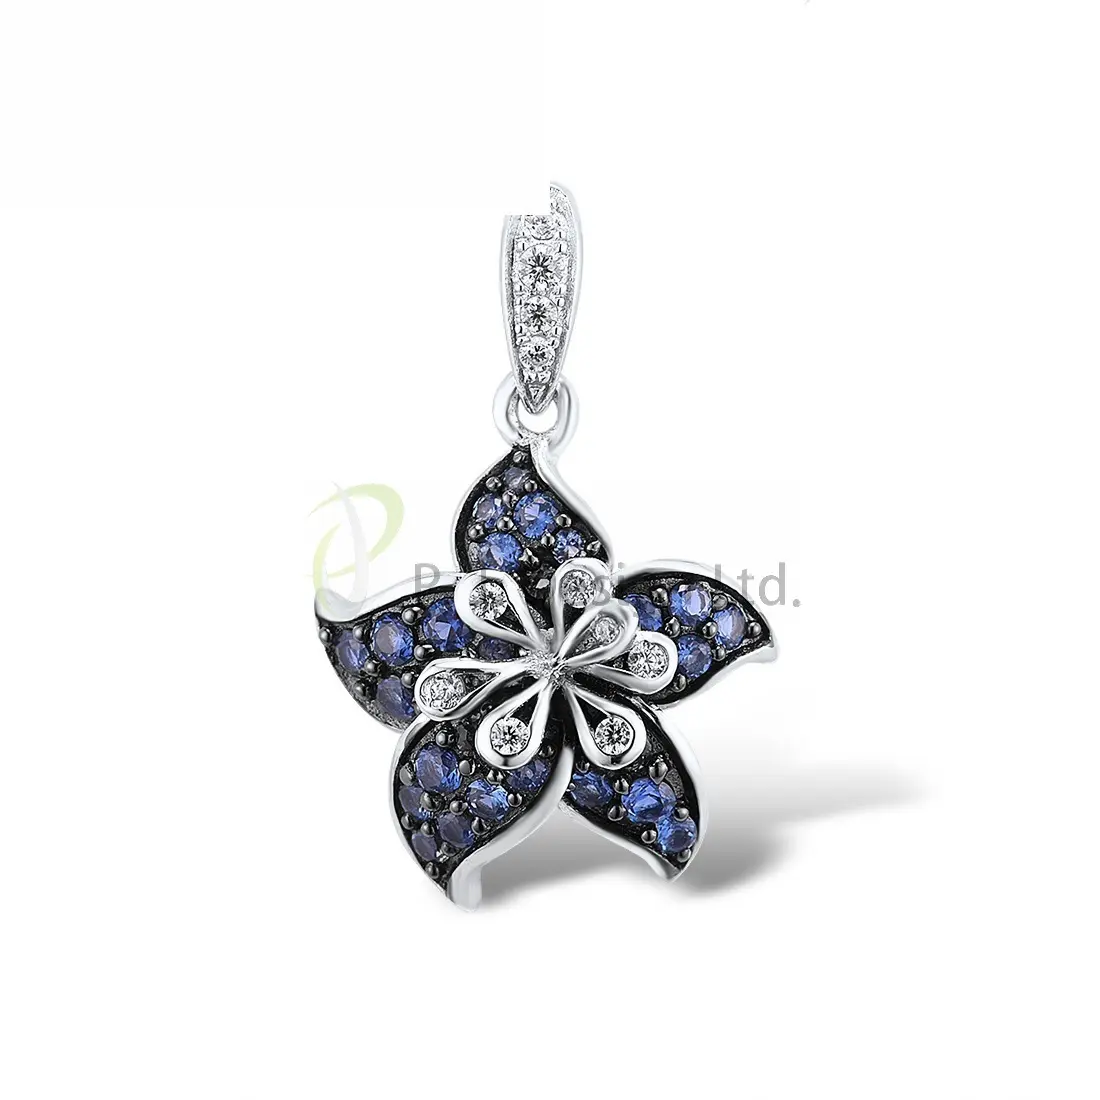 Professional Made Pretty Blue Flower Pendant without chain 925 Sterling Silver with Charming Cubic Zircon Fashion Jewelry